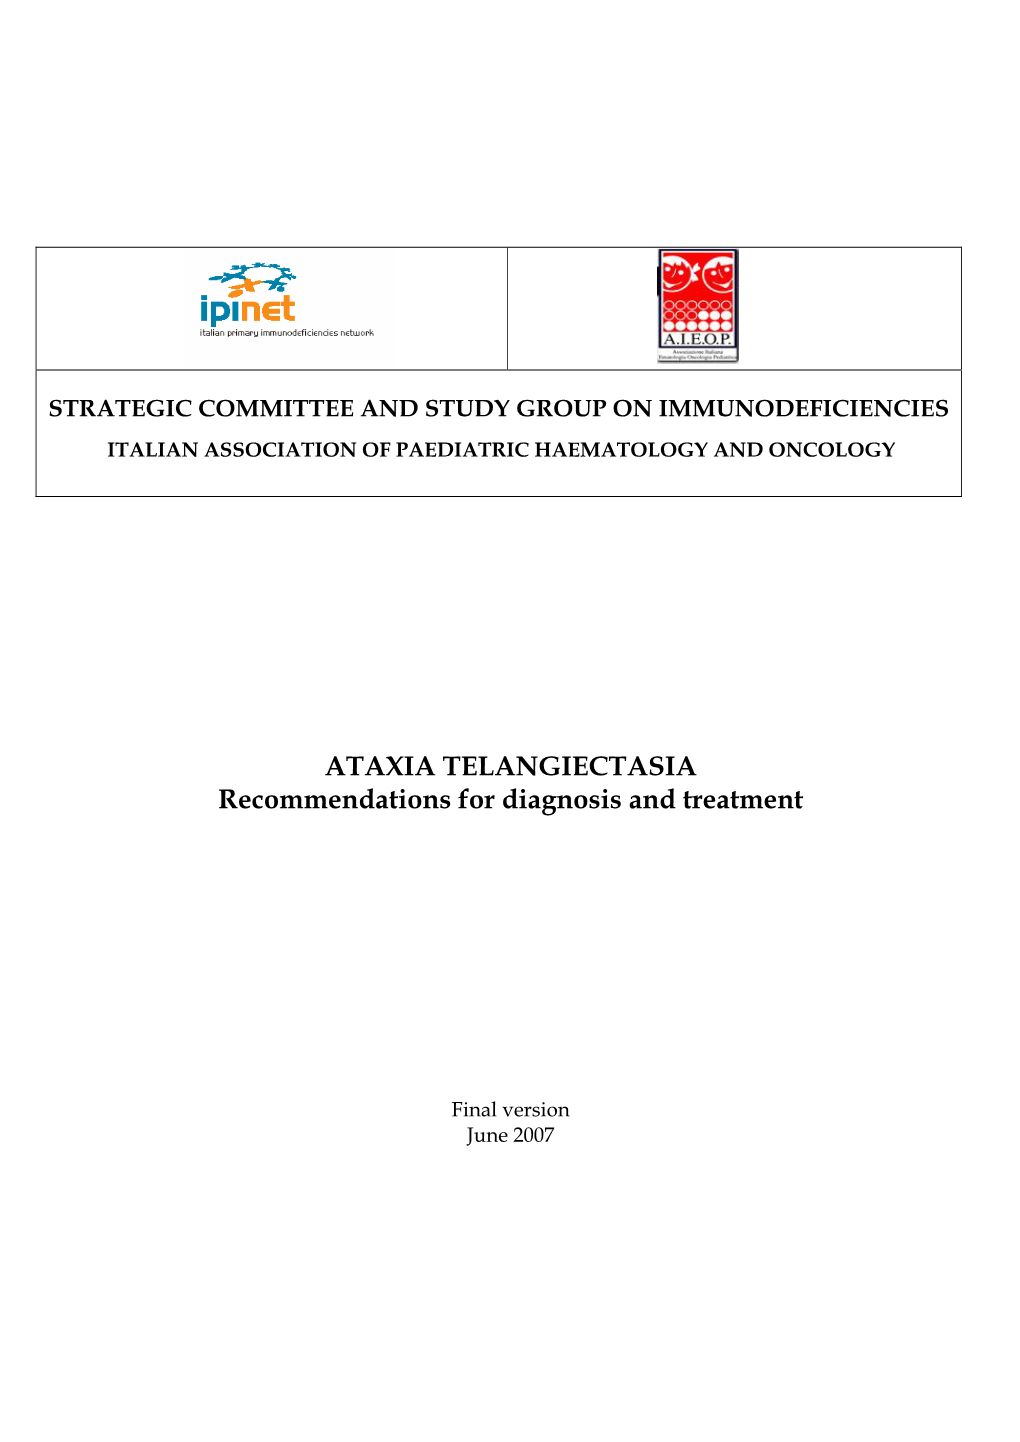 ATAXIA TELANGIECTASIA Recommendations for Diagnosis and Treatment